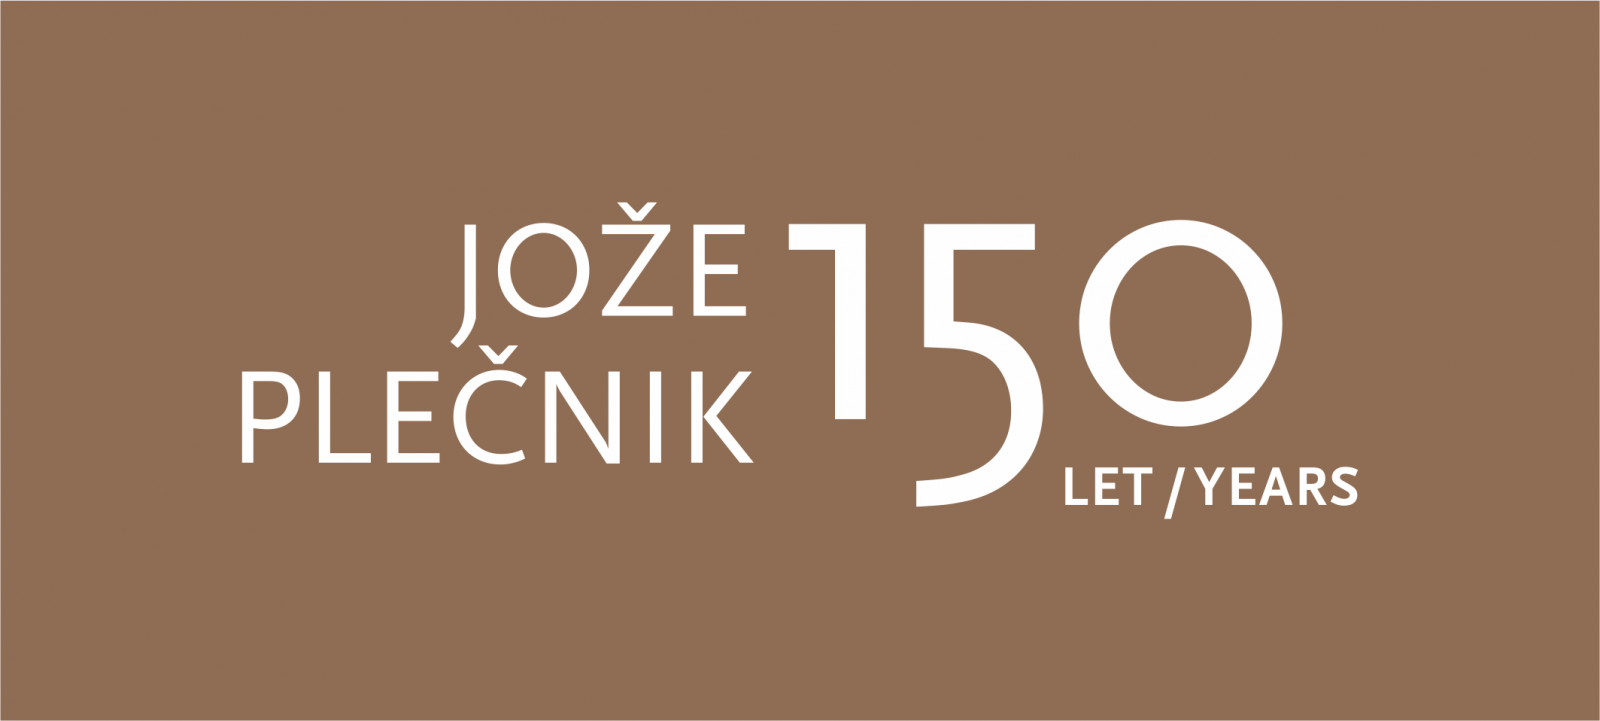 Inscription Jože Plečnik 150 Let / Years on a brown background with white letters and numbers